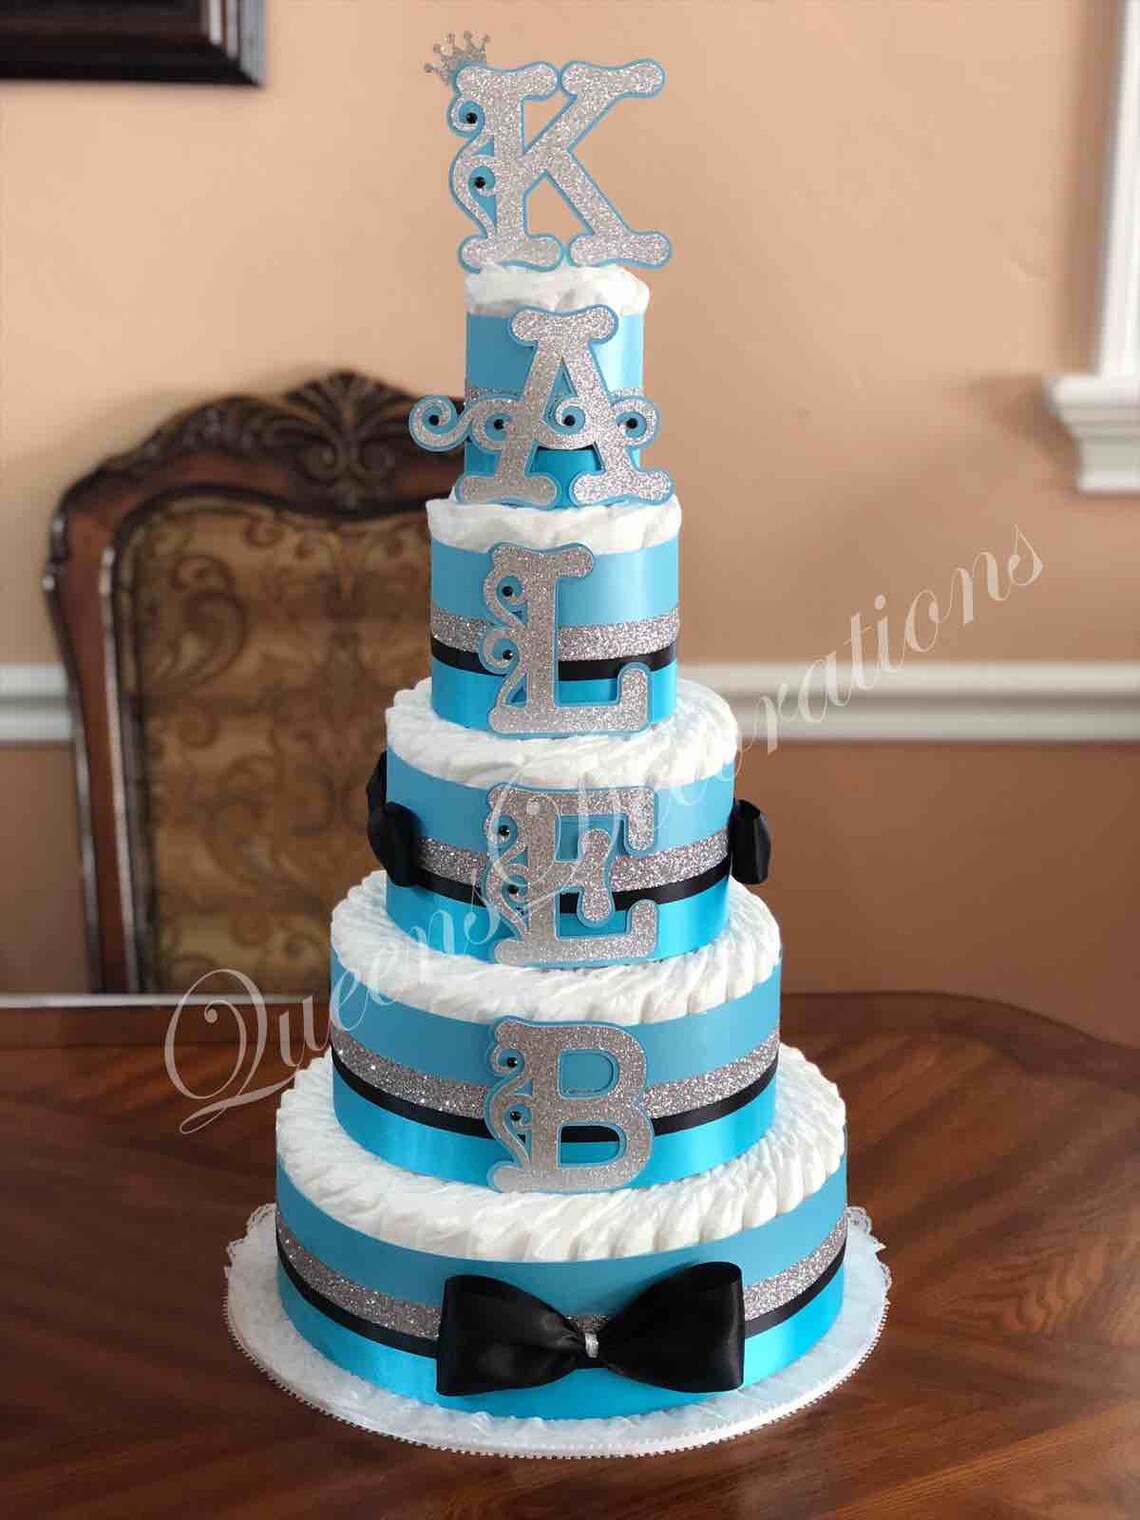 5 Tier Diaper Cake/Turquoise Black and Silver Customizable | Etsy